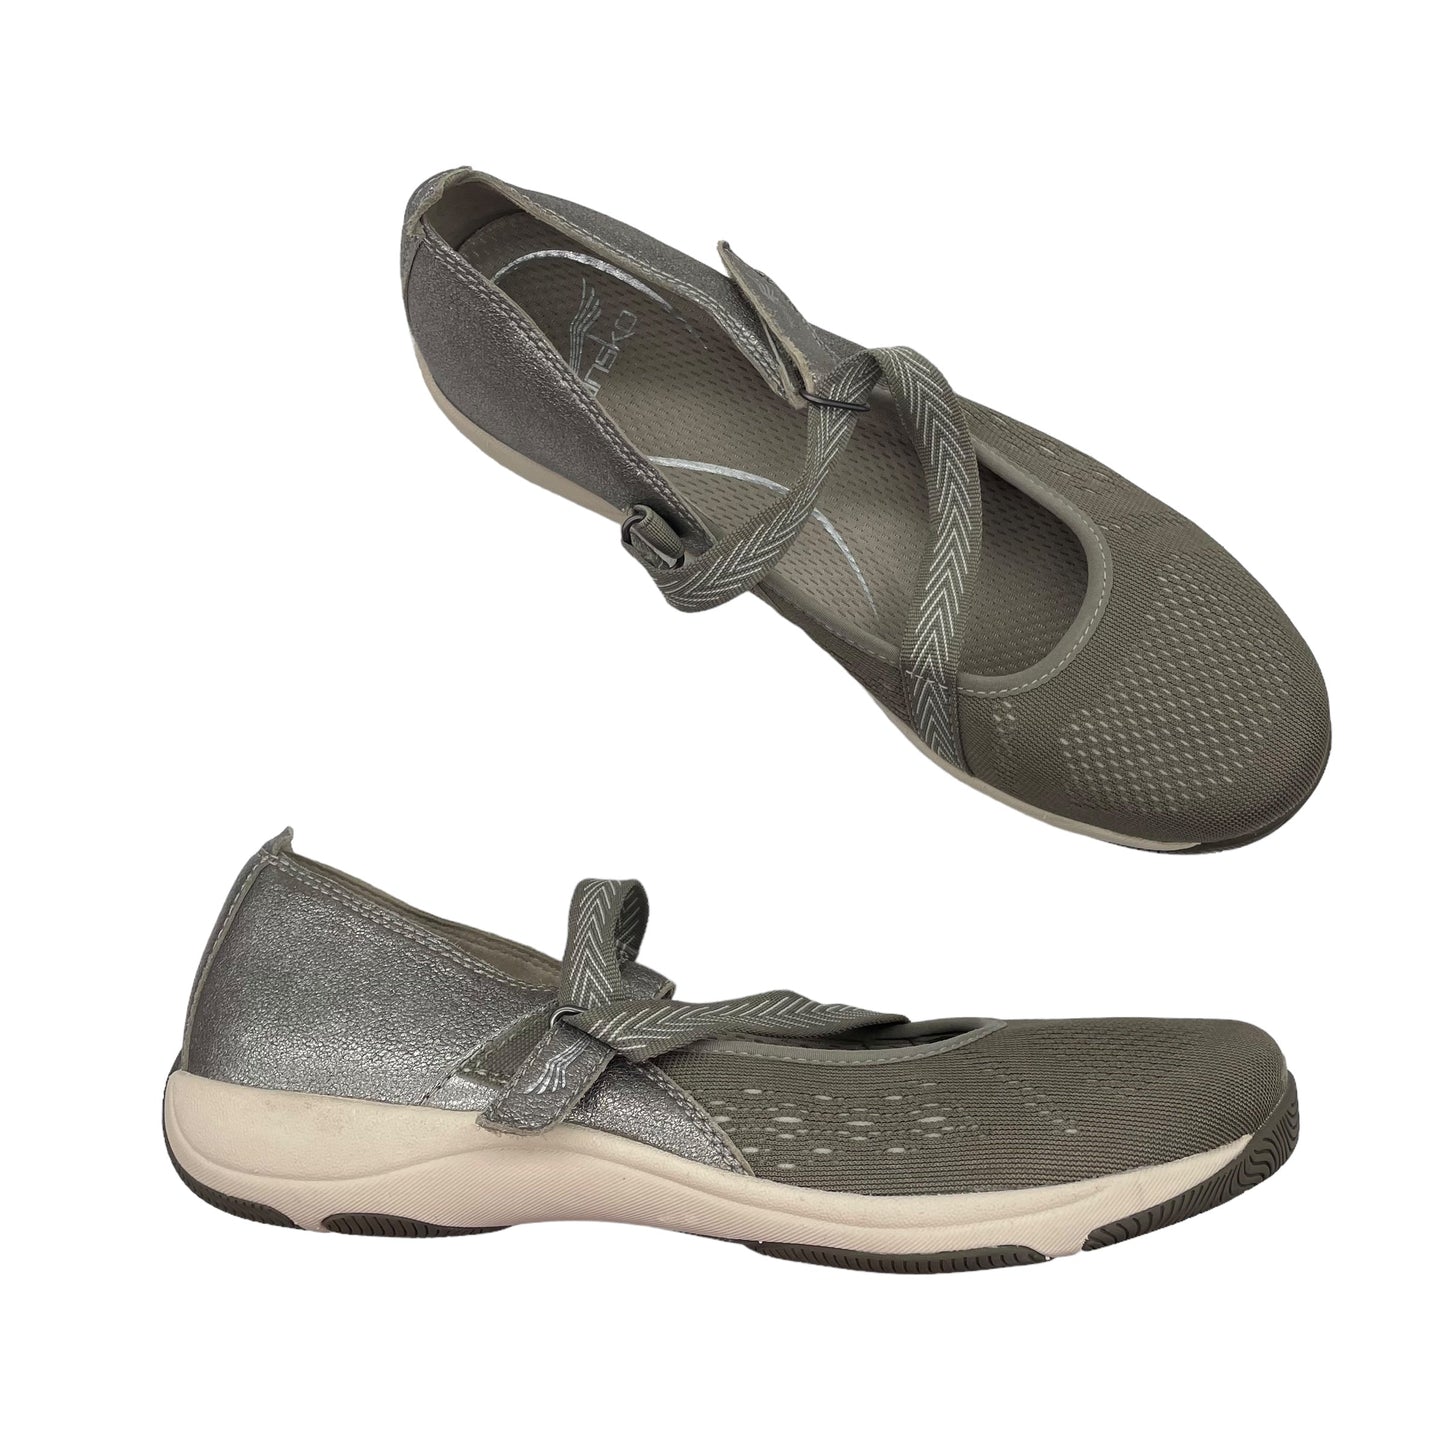 TAUPE DANSKO SHOES FLATS, Size 9.5